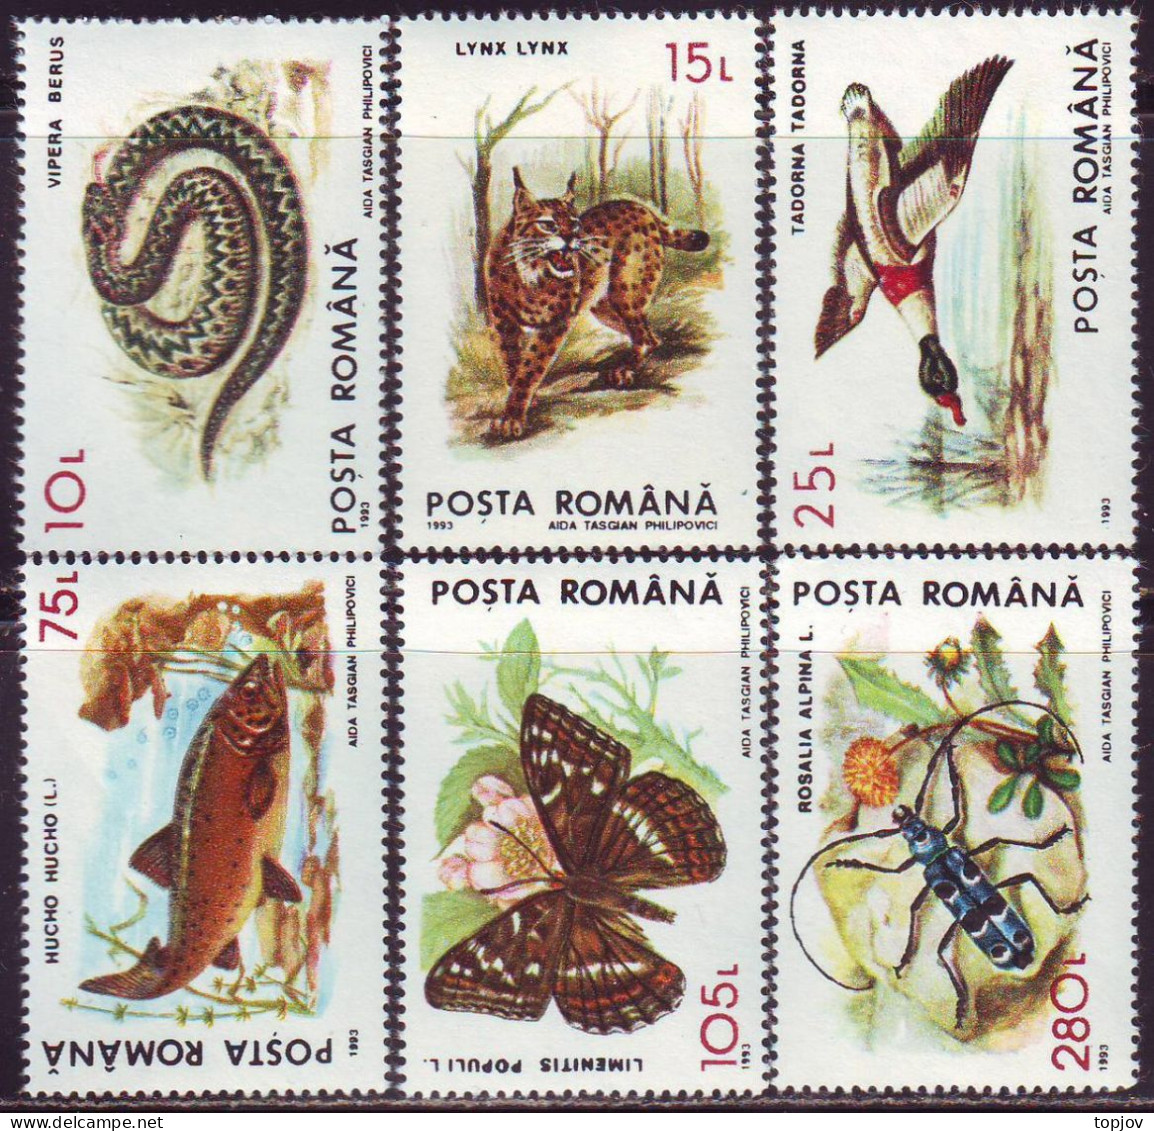 ROMANIA - PROTECT ANIMALS - BUTTERFLIES  DUCK  FISH  LYNX. - **MNH - 1993 - Snakes